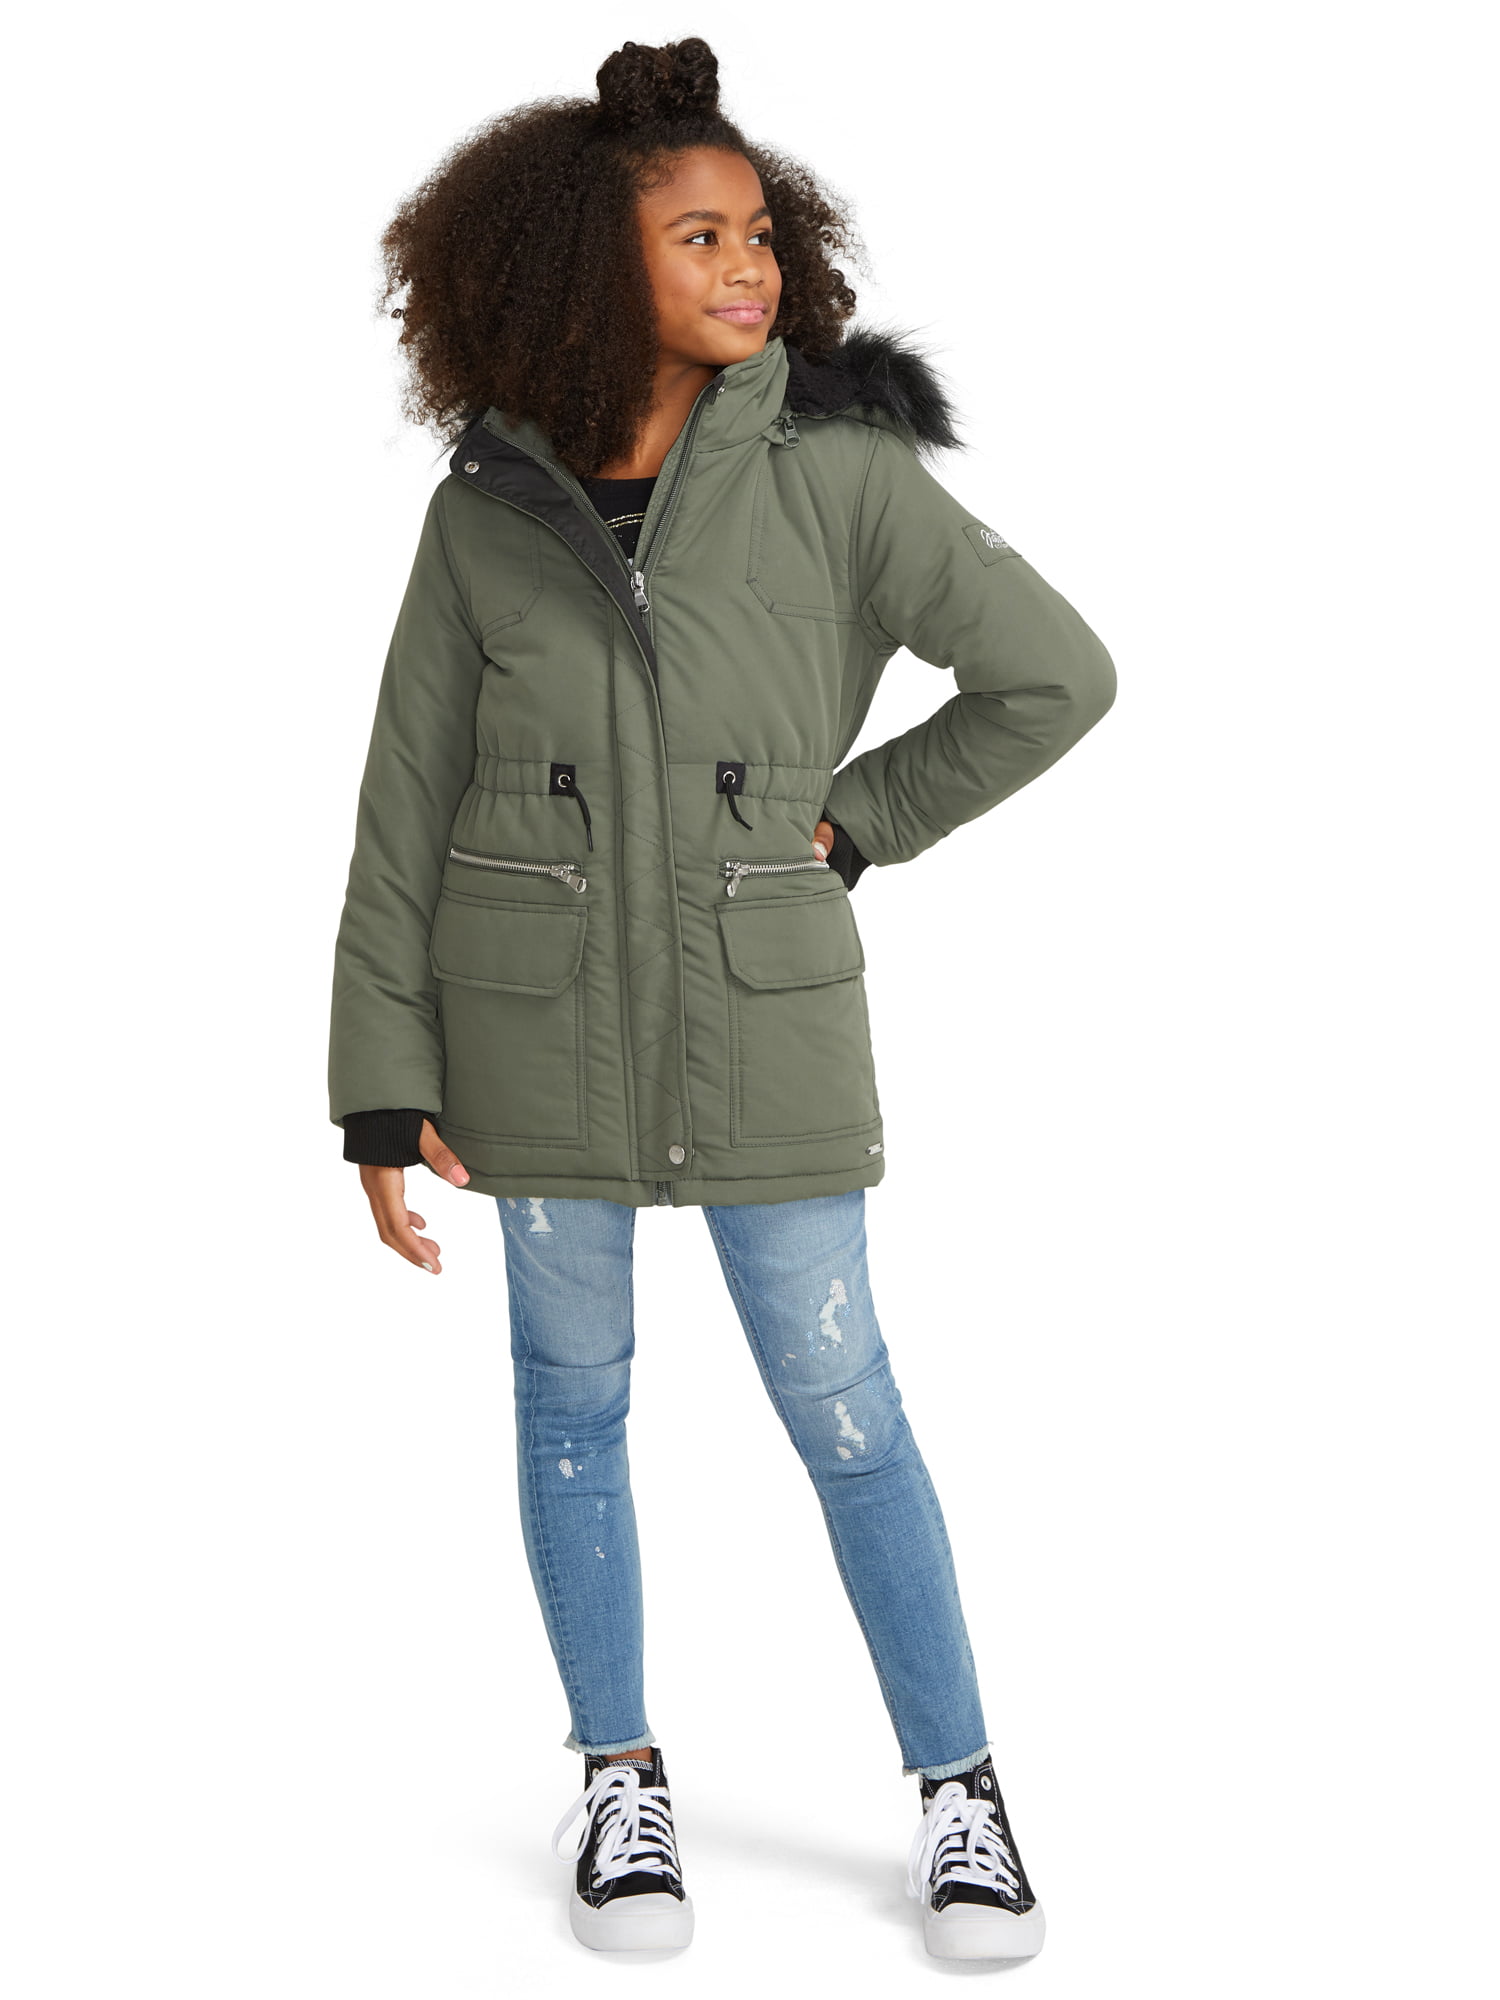 Justice Girls Water-Resistant Canvas Faux Fur Pile-Lined Parka Jacket with  Hood, Sizes 5-18